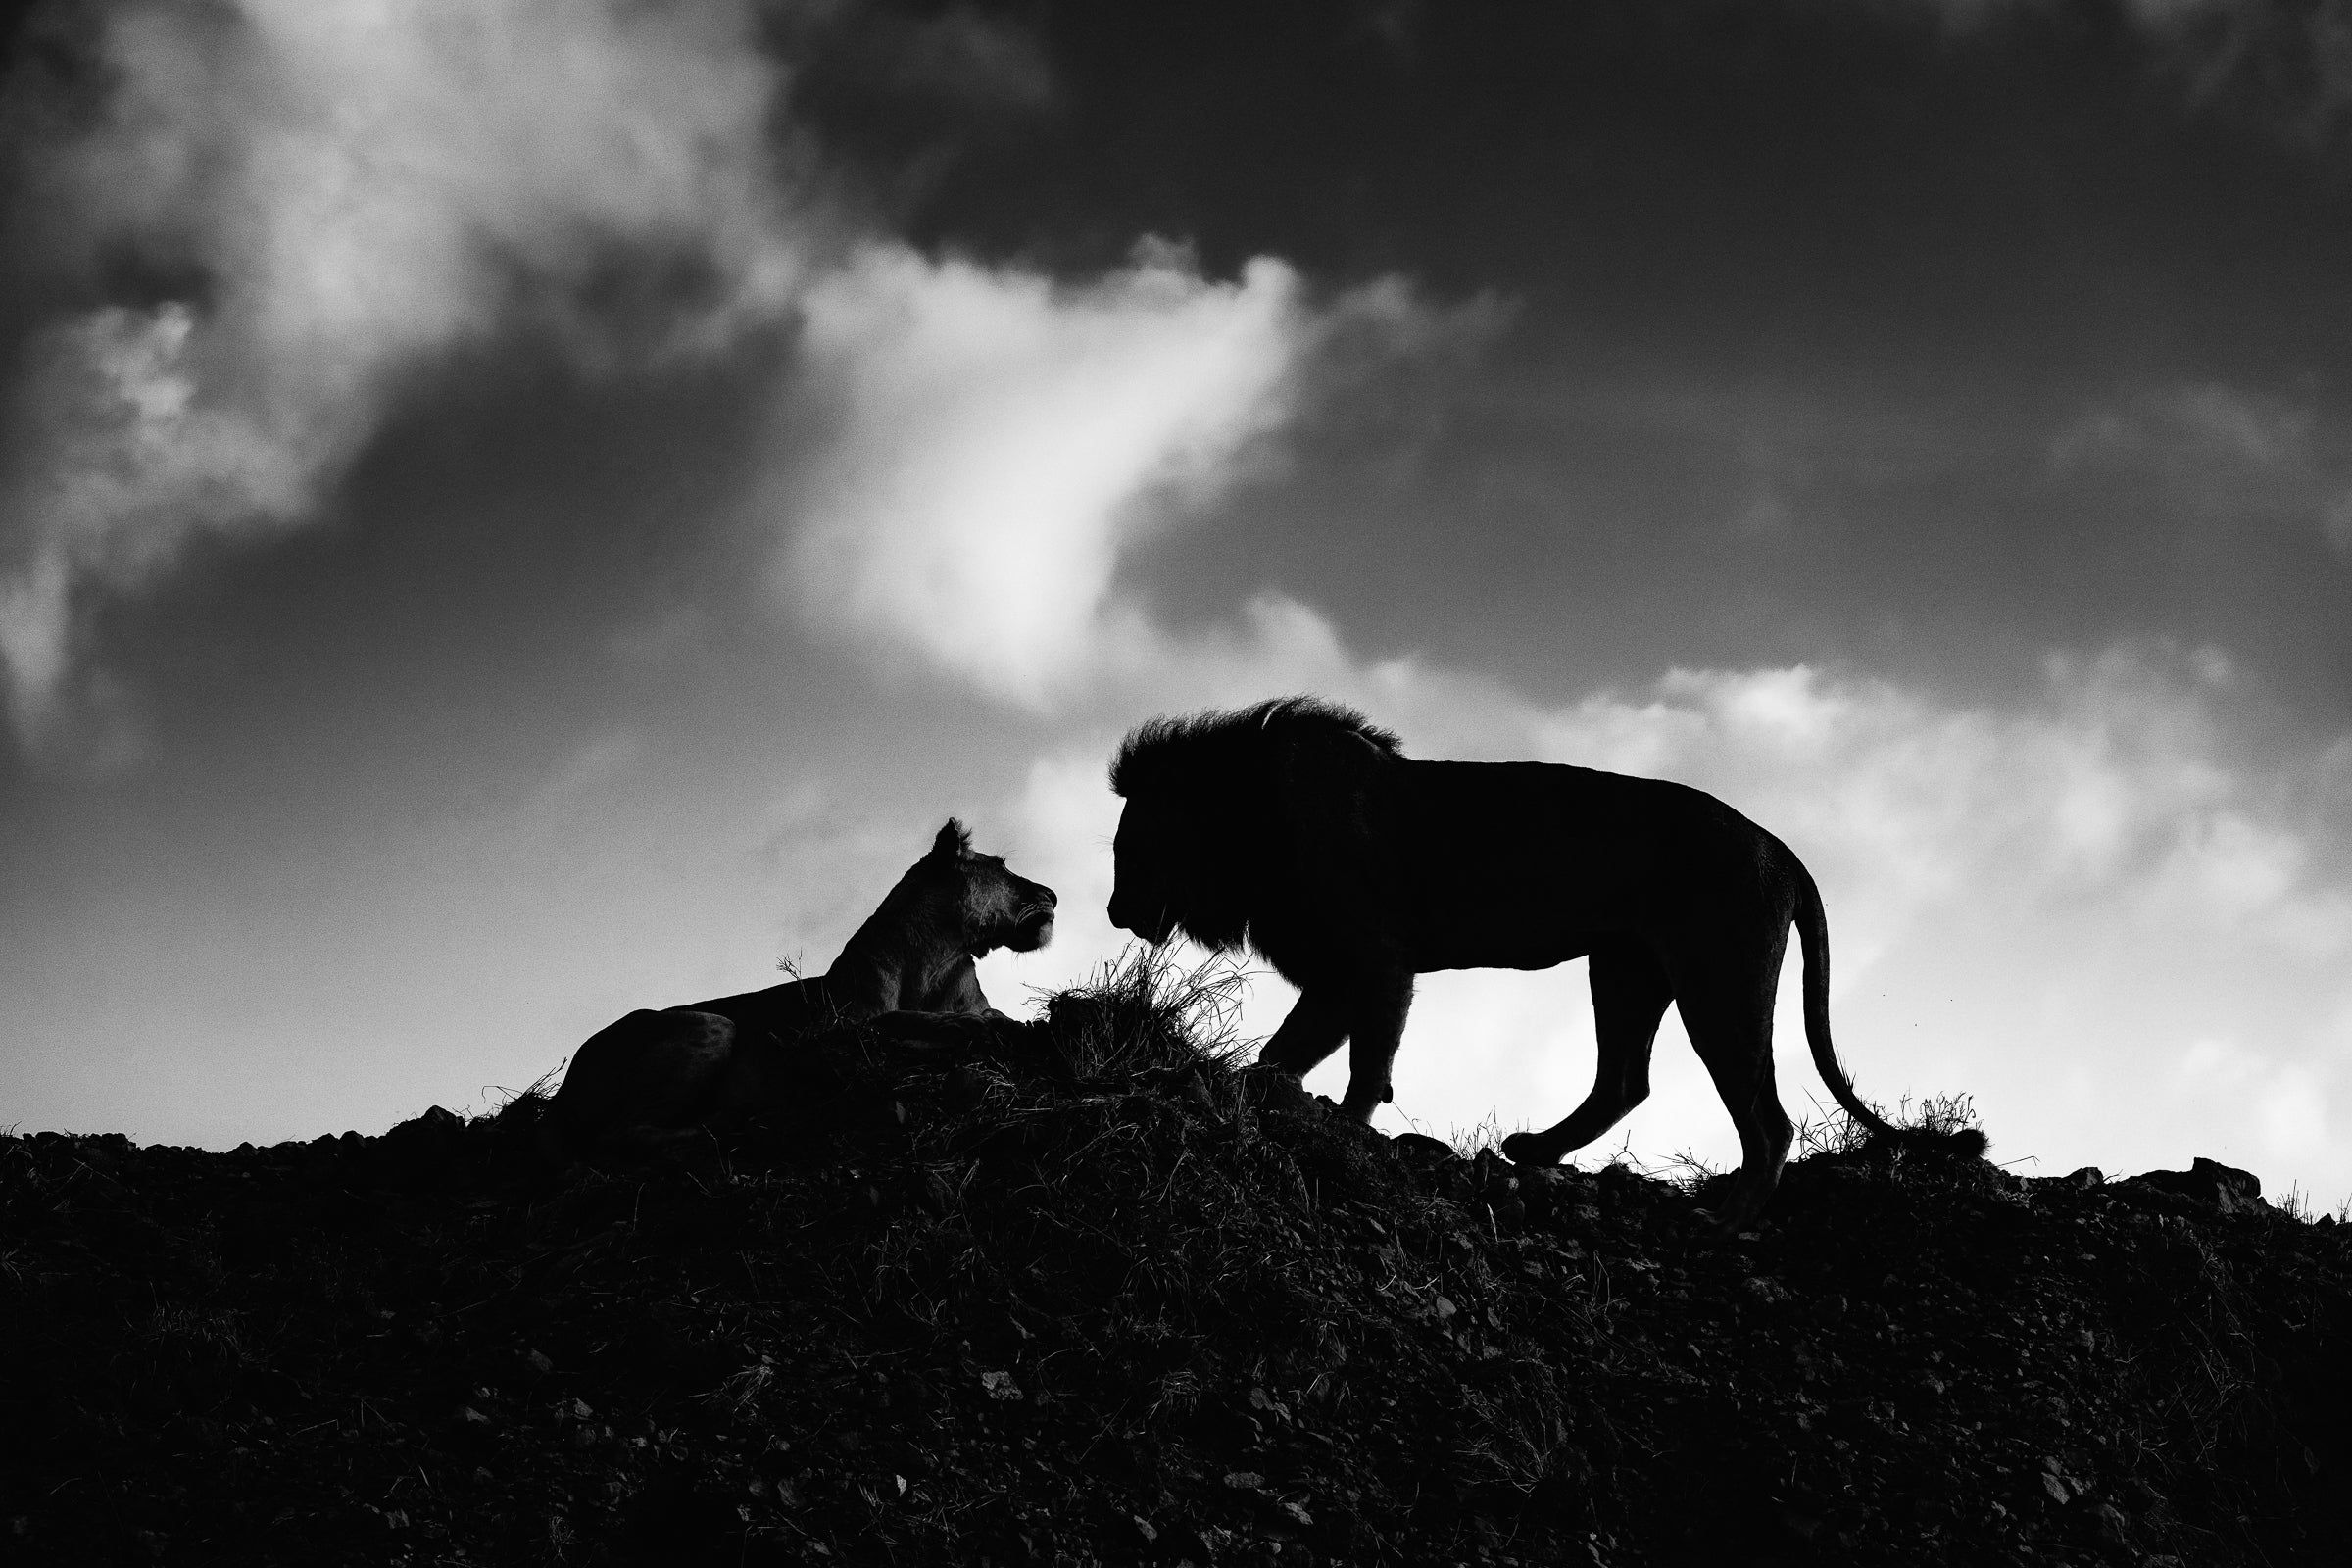 Silhouette of two lions in B&W